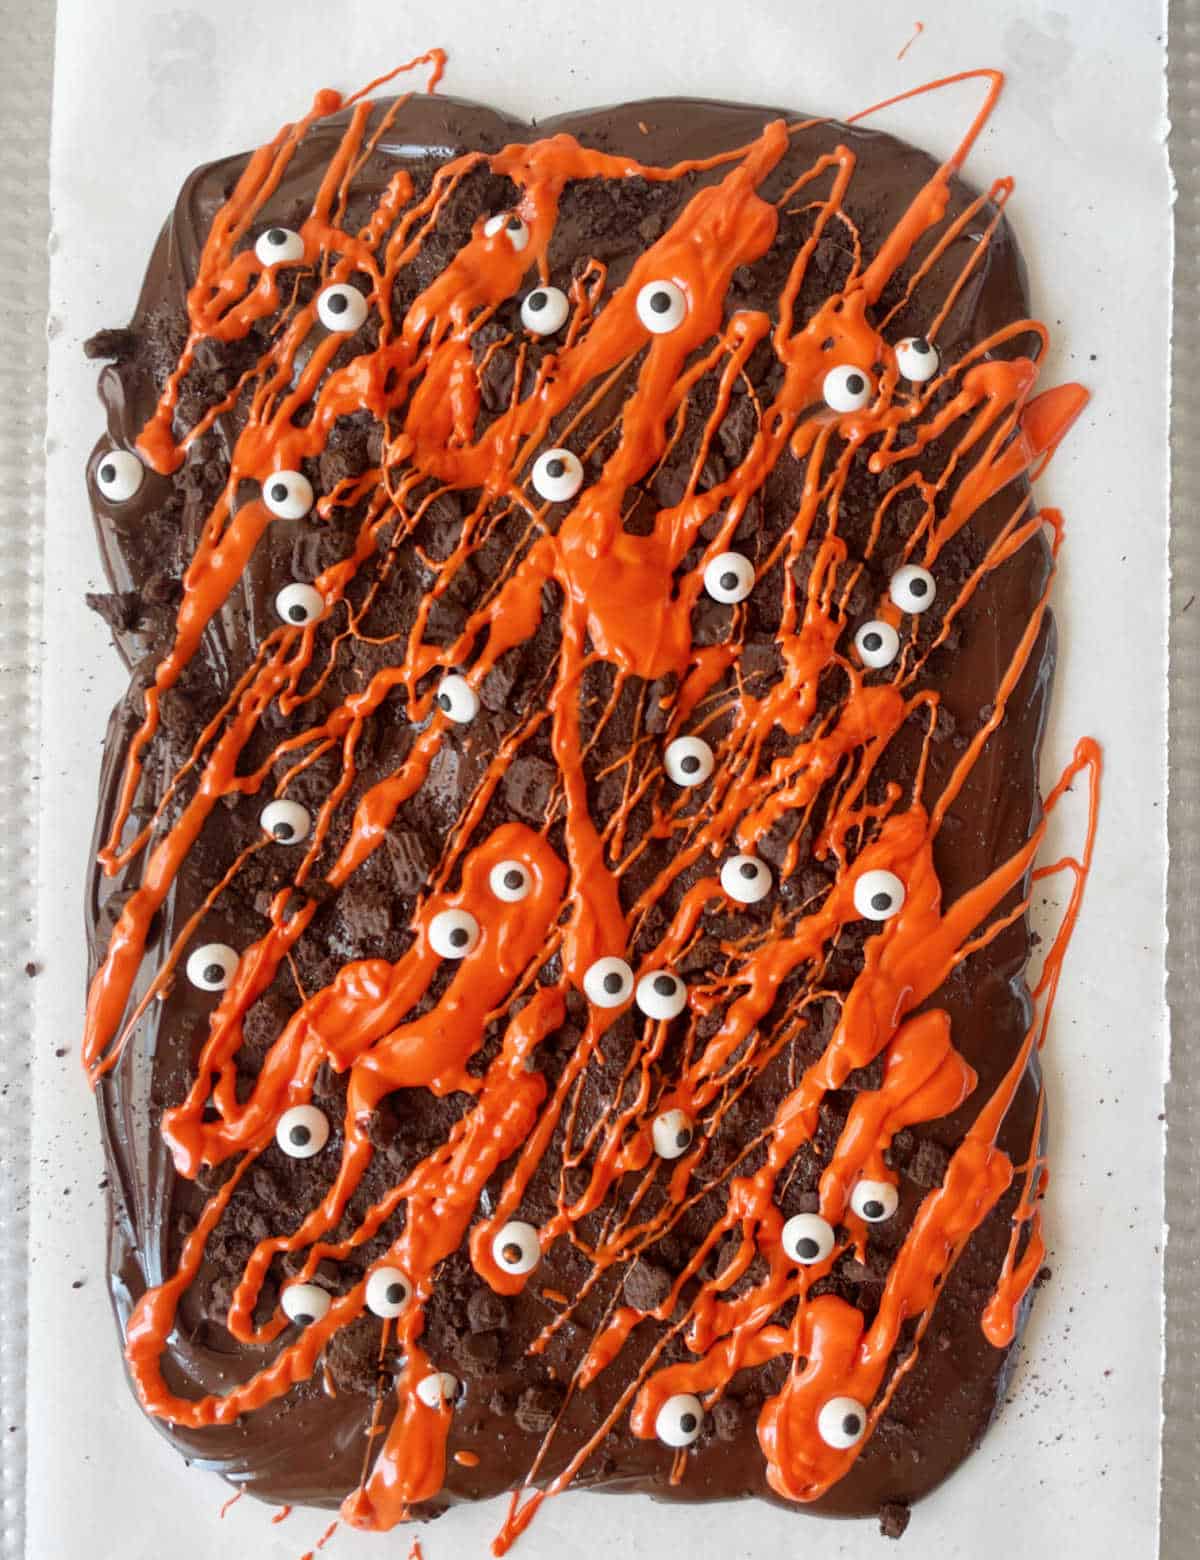 Halloween bark with dark and orange colored chocolates, crushed chocolate wafers, and candy eyes. Top view.